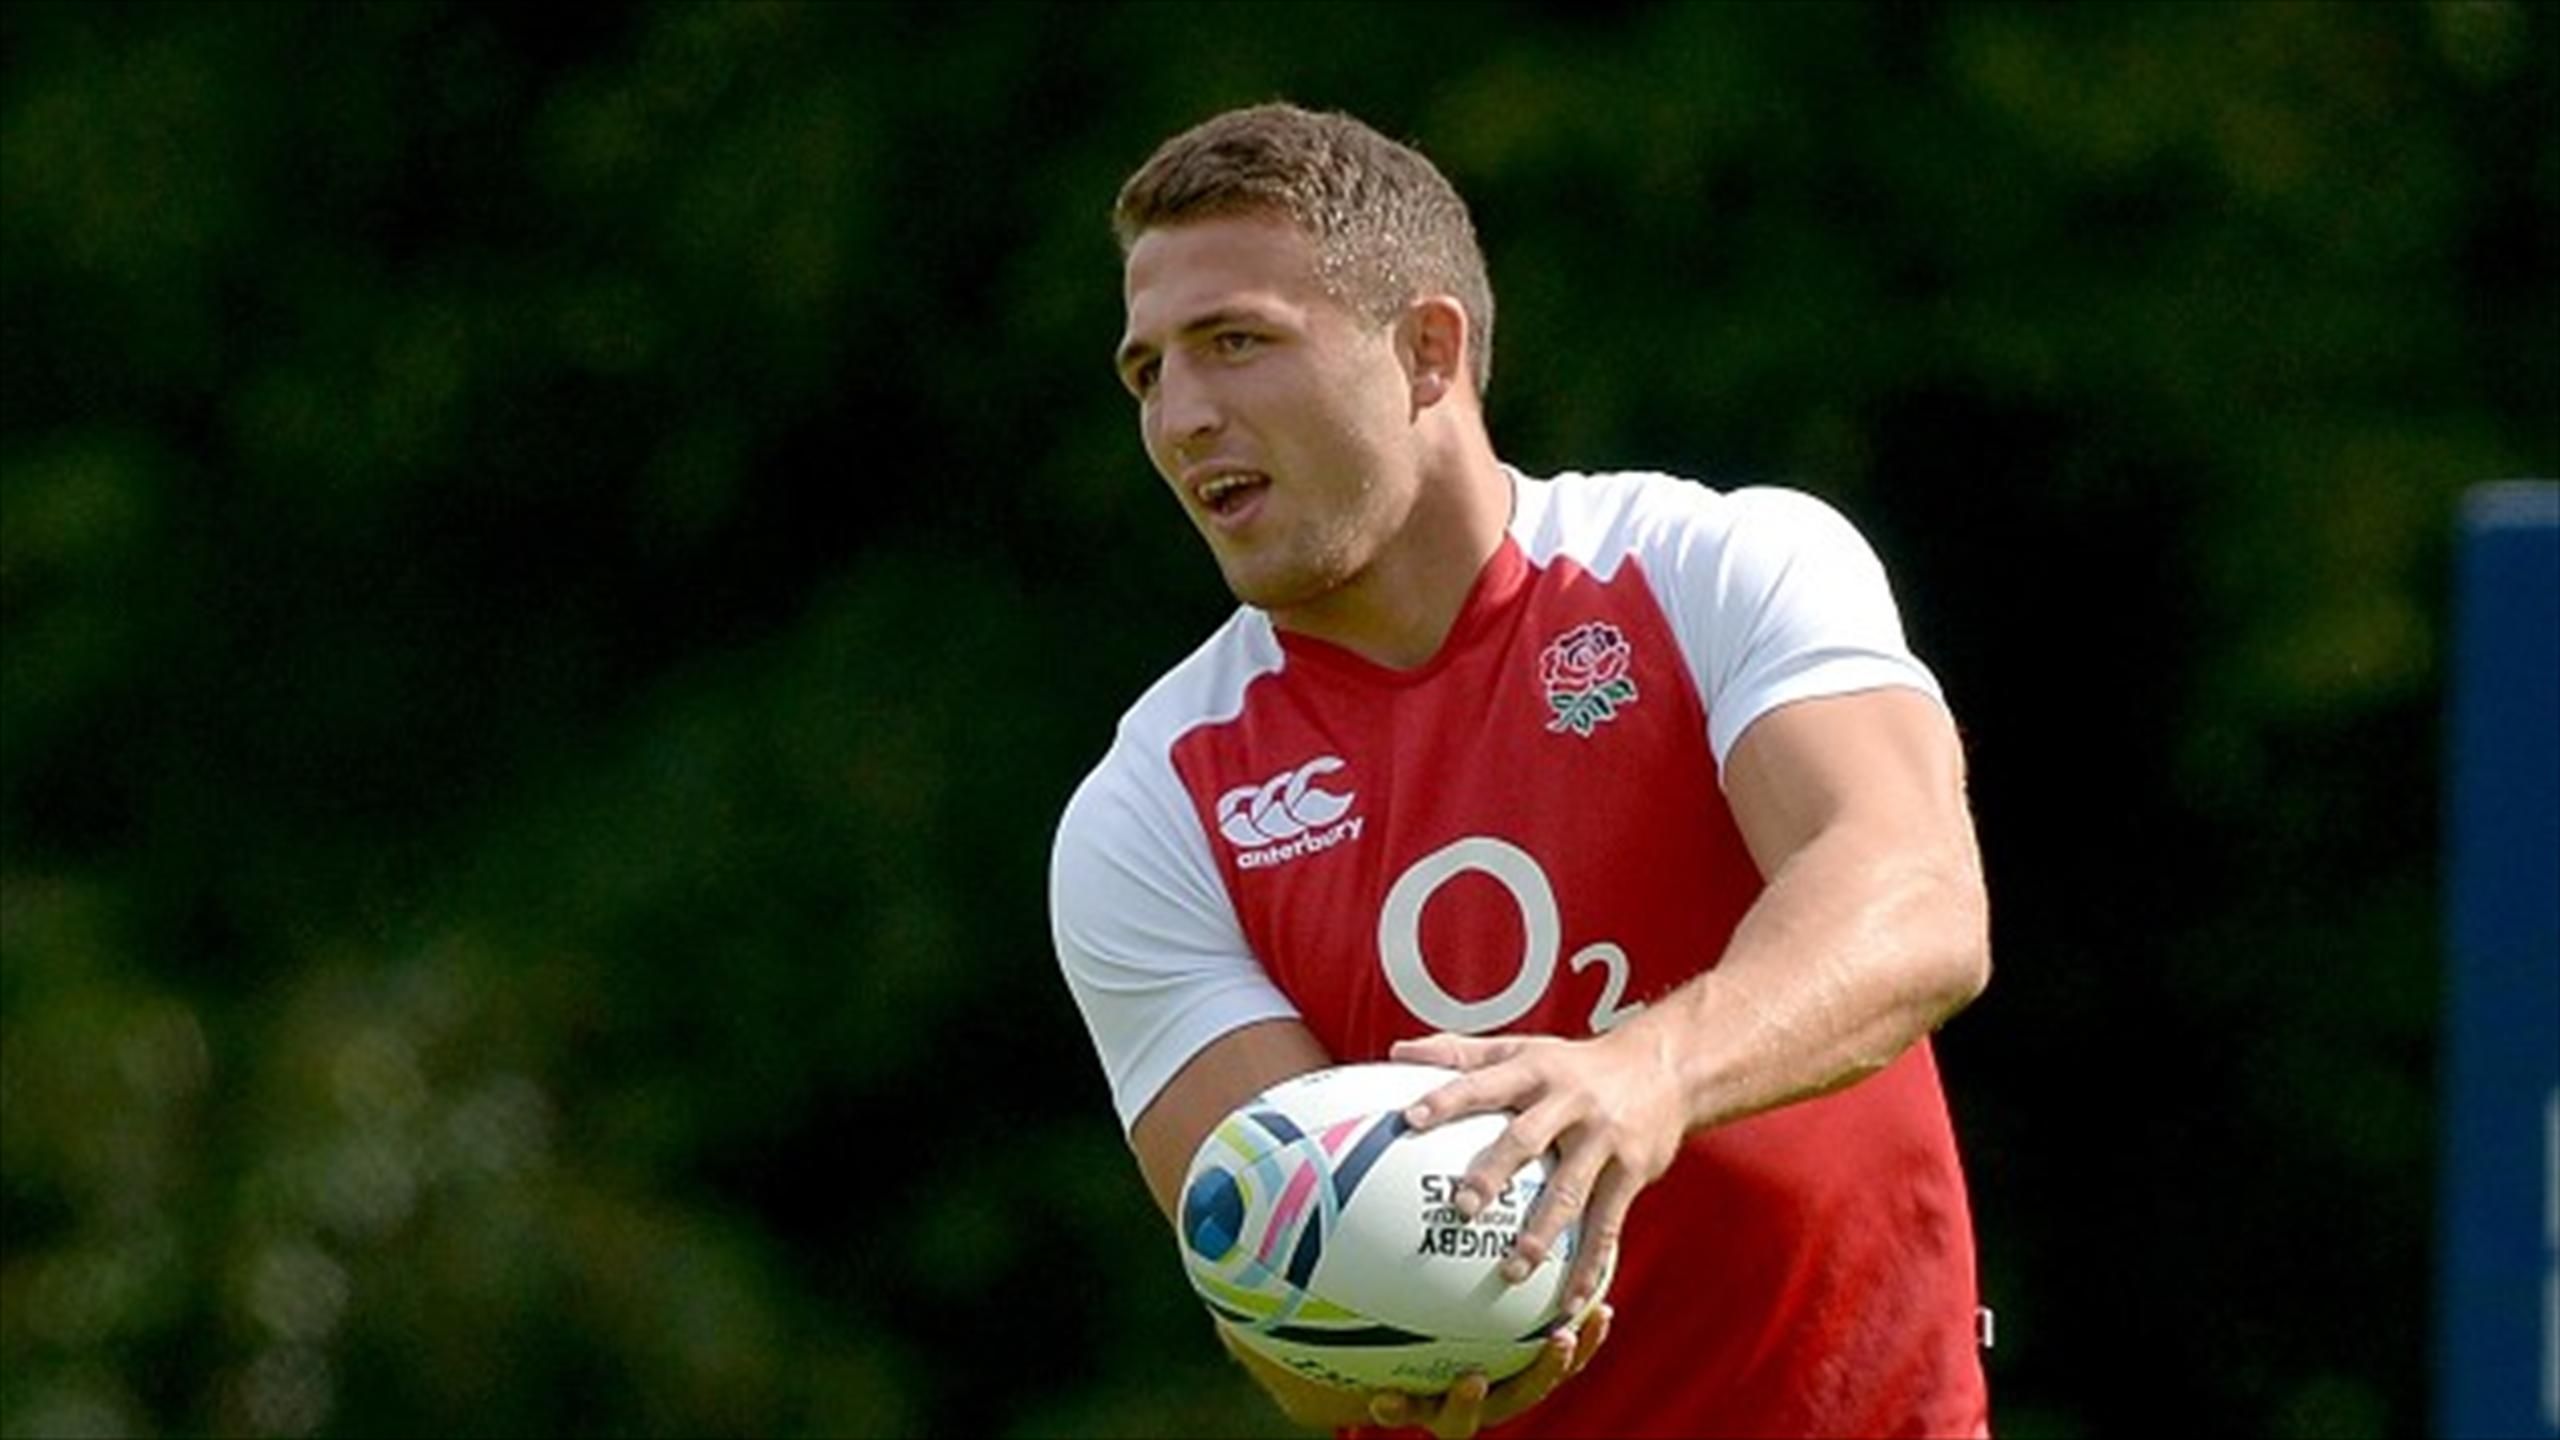 Former England rugby union captain Will Carling feels sorry for Sam Burgess 